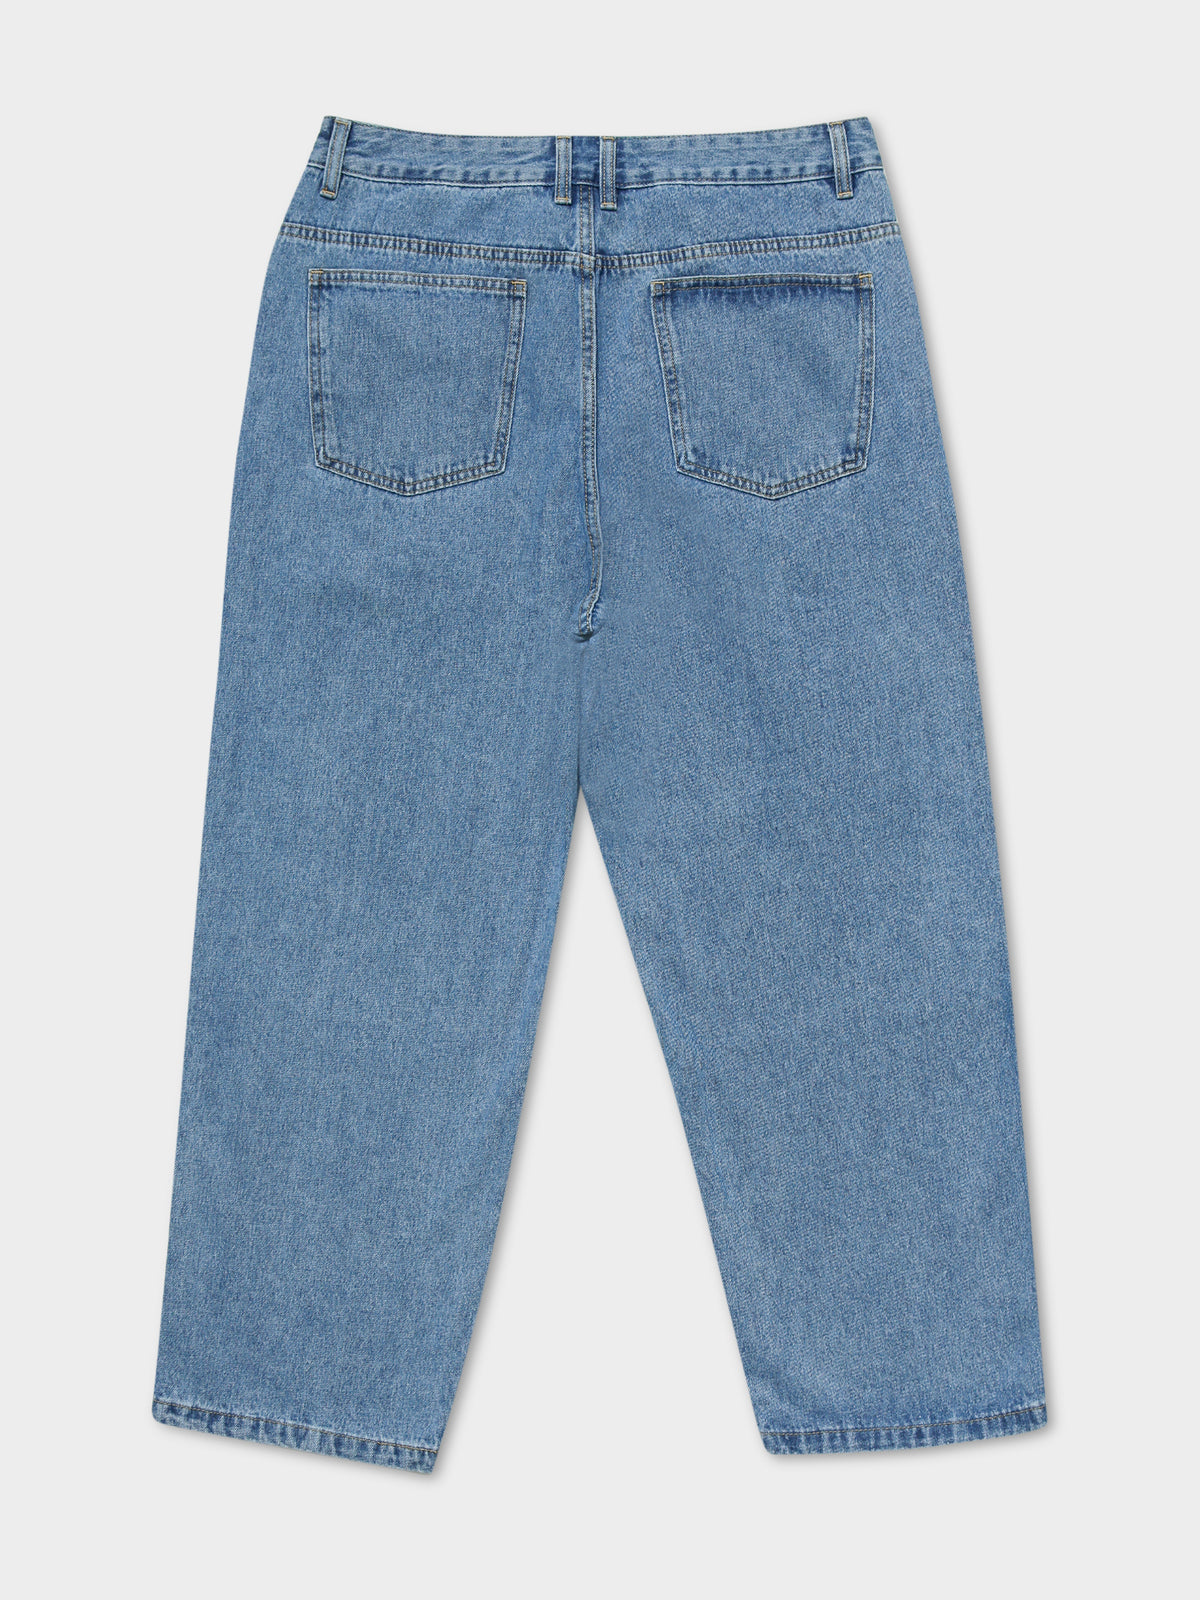 Bull 91 Jeans in Mid Blue